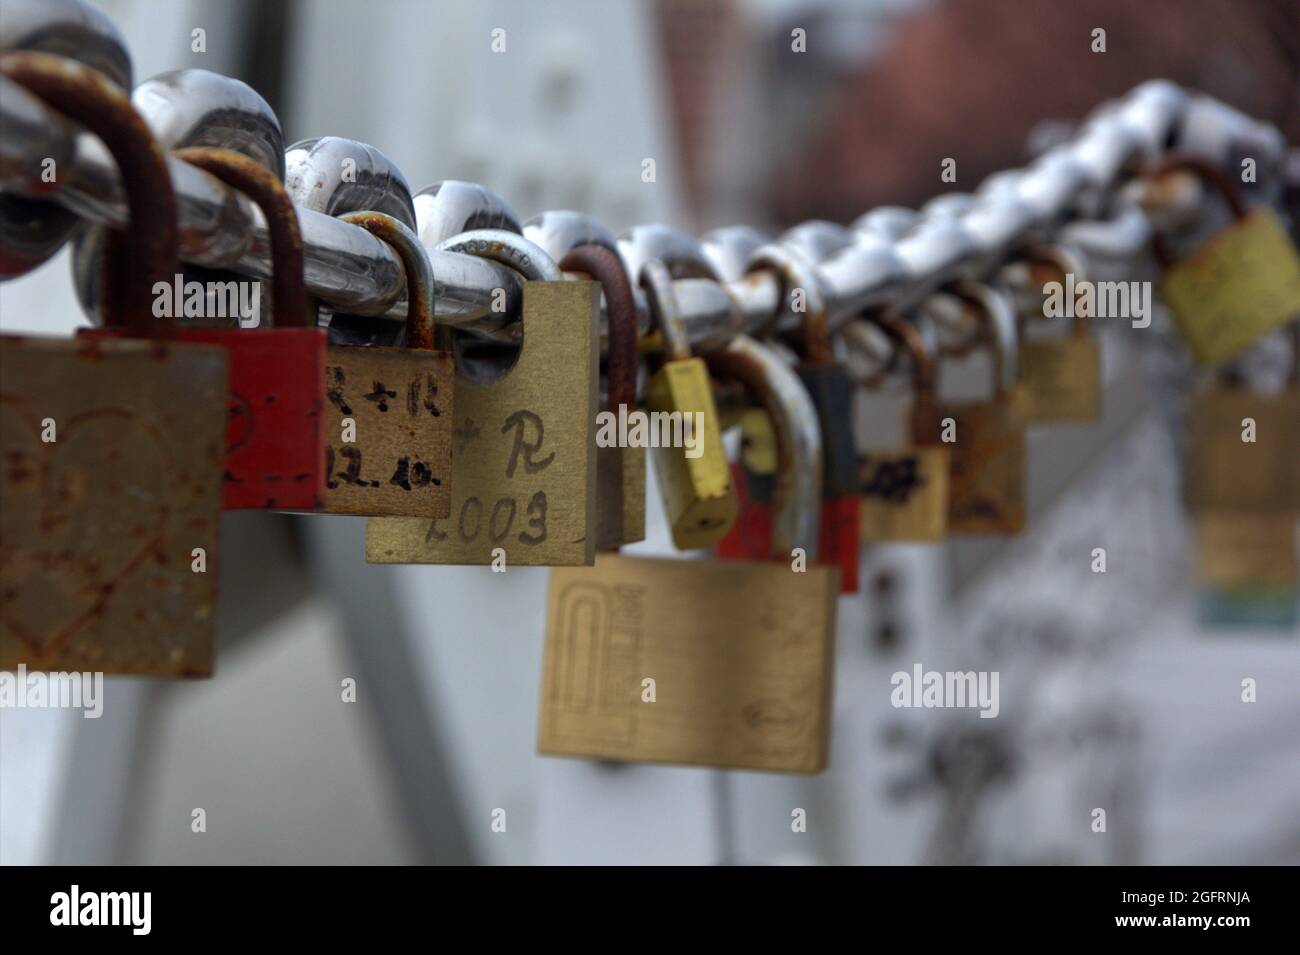 BREMEN, GERMANY - Aug 21, 2021: Locks on a chain with names and dates to remember Stock Photo